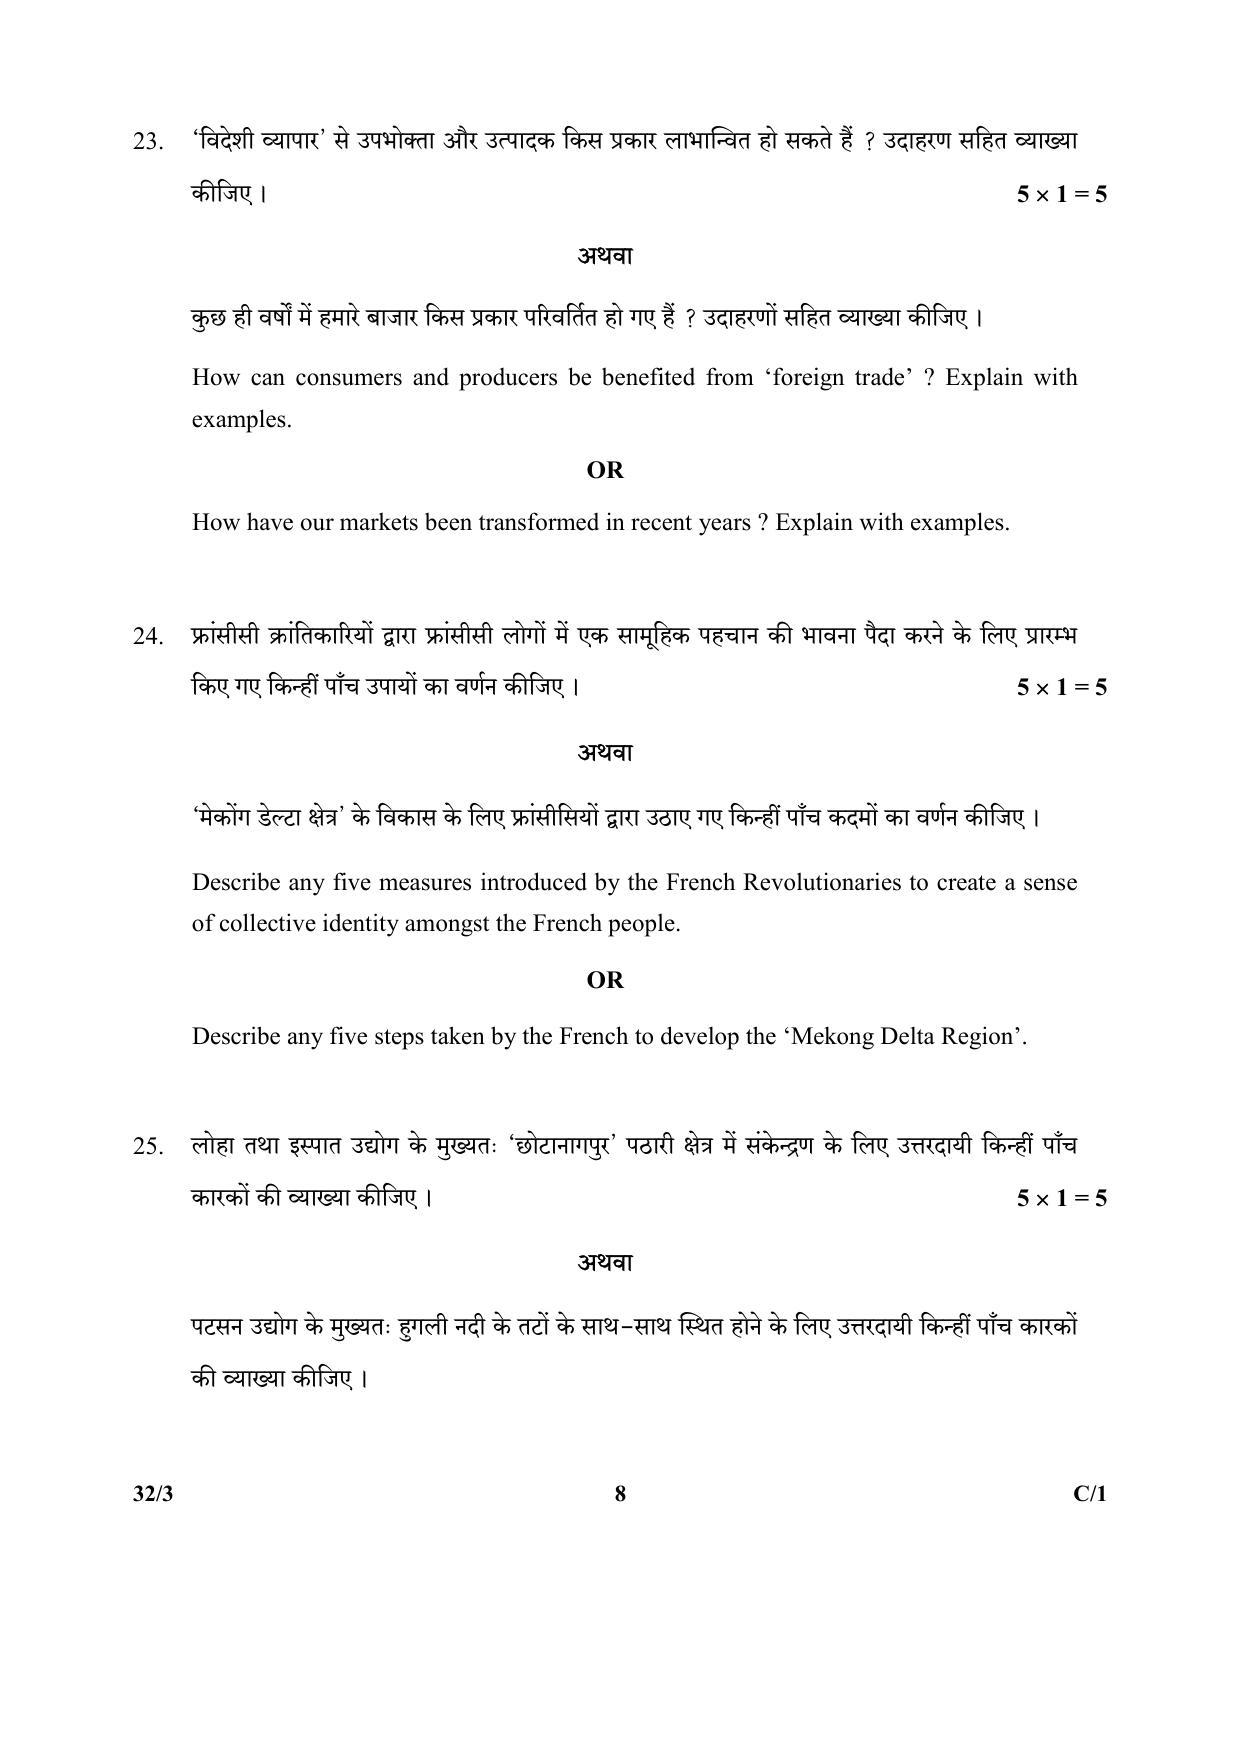 CBSE Class 10 32-3_Social Science 2018 Compartment Question Paper - Page 8